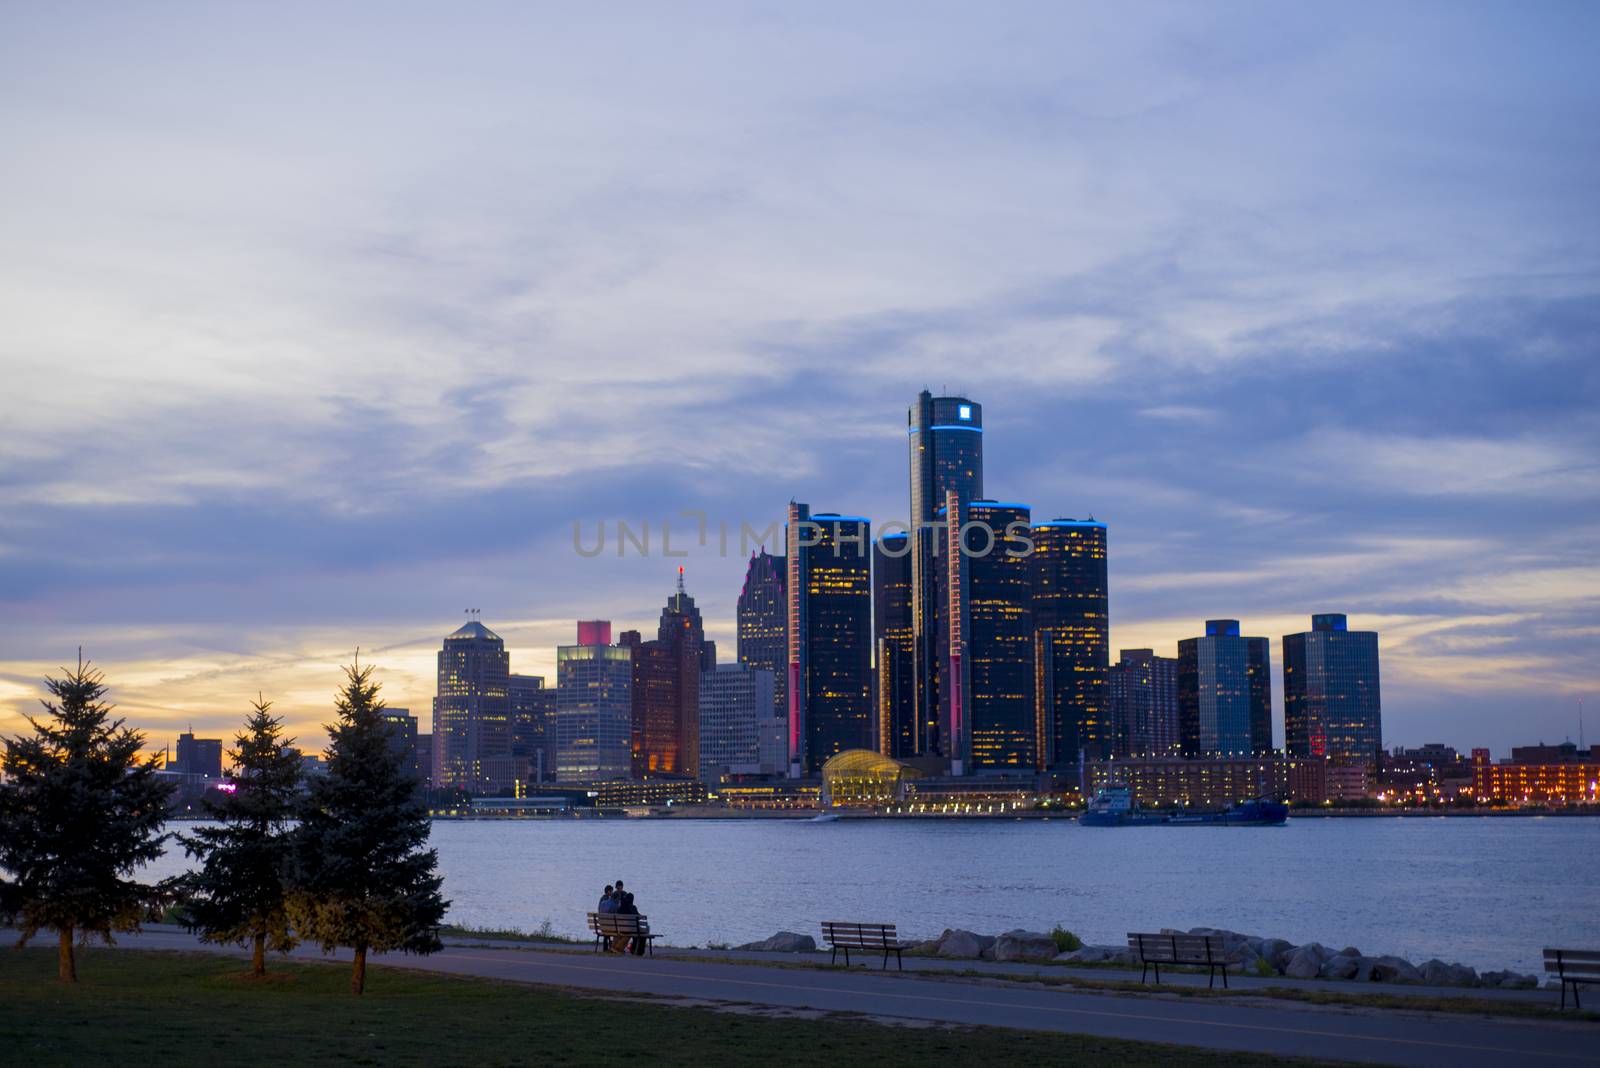 DETROIT, MI-SEPTEMBER, 2015: A view of Detroit skyline with the world headquarters for General Motors Corporation, situated along the Detroit River. Taken at sunset from Windsor, Ontario.